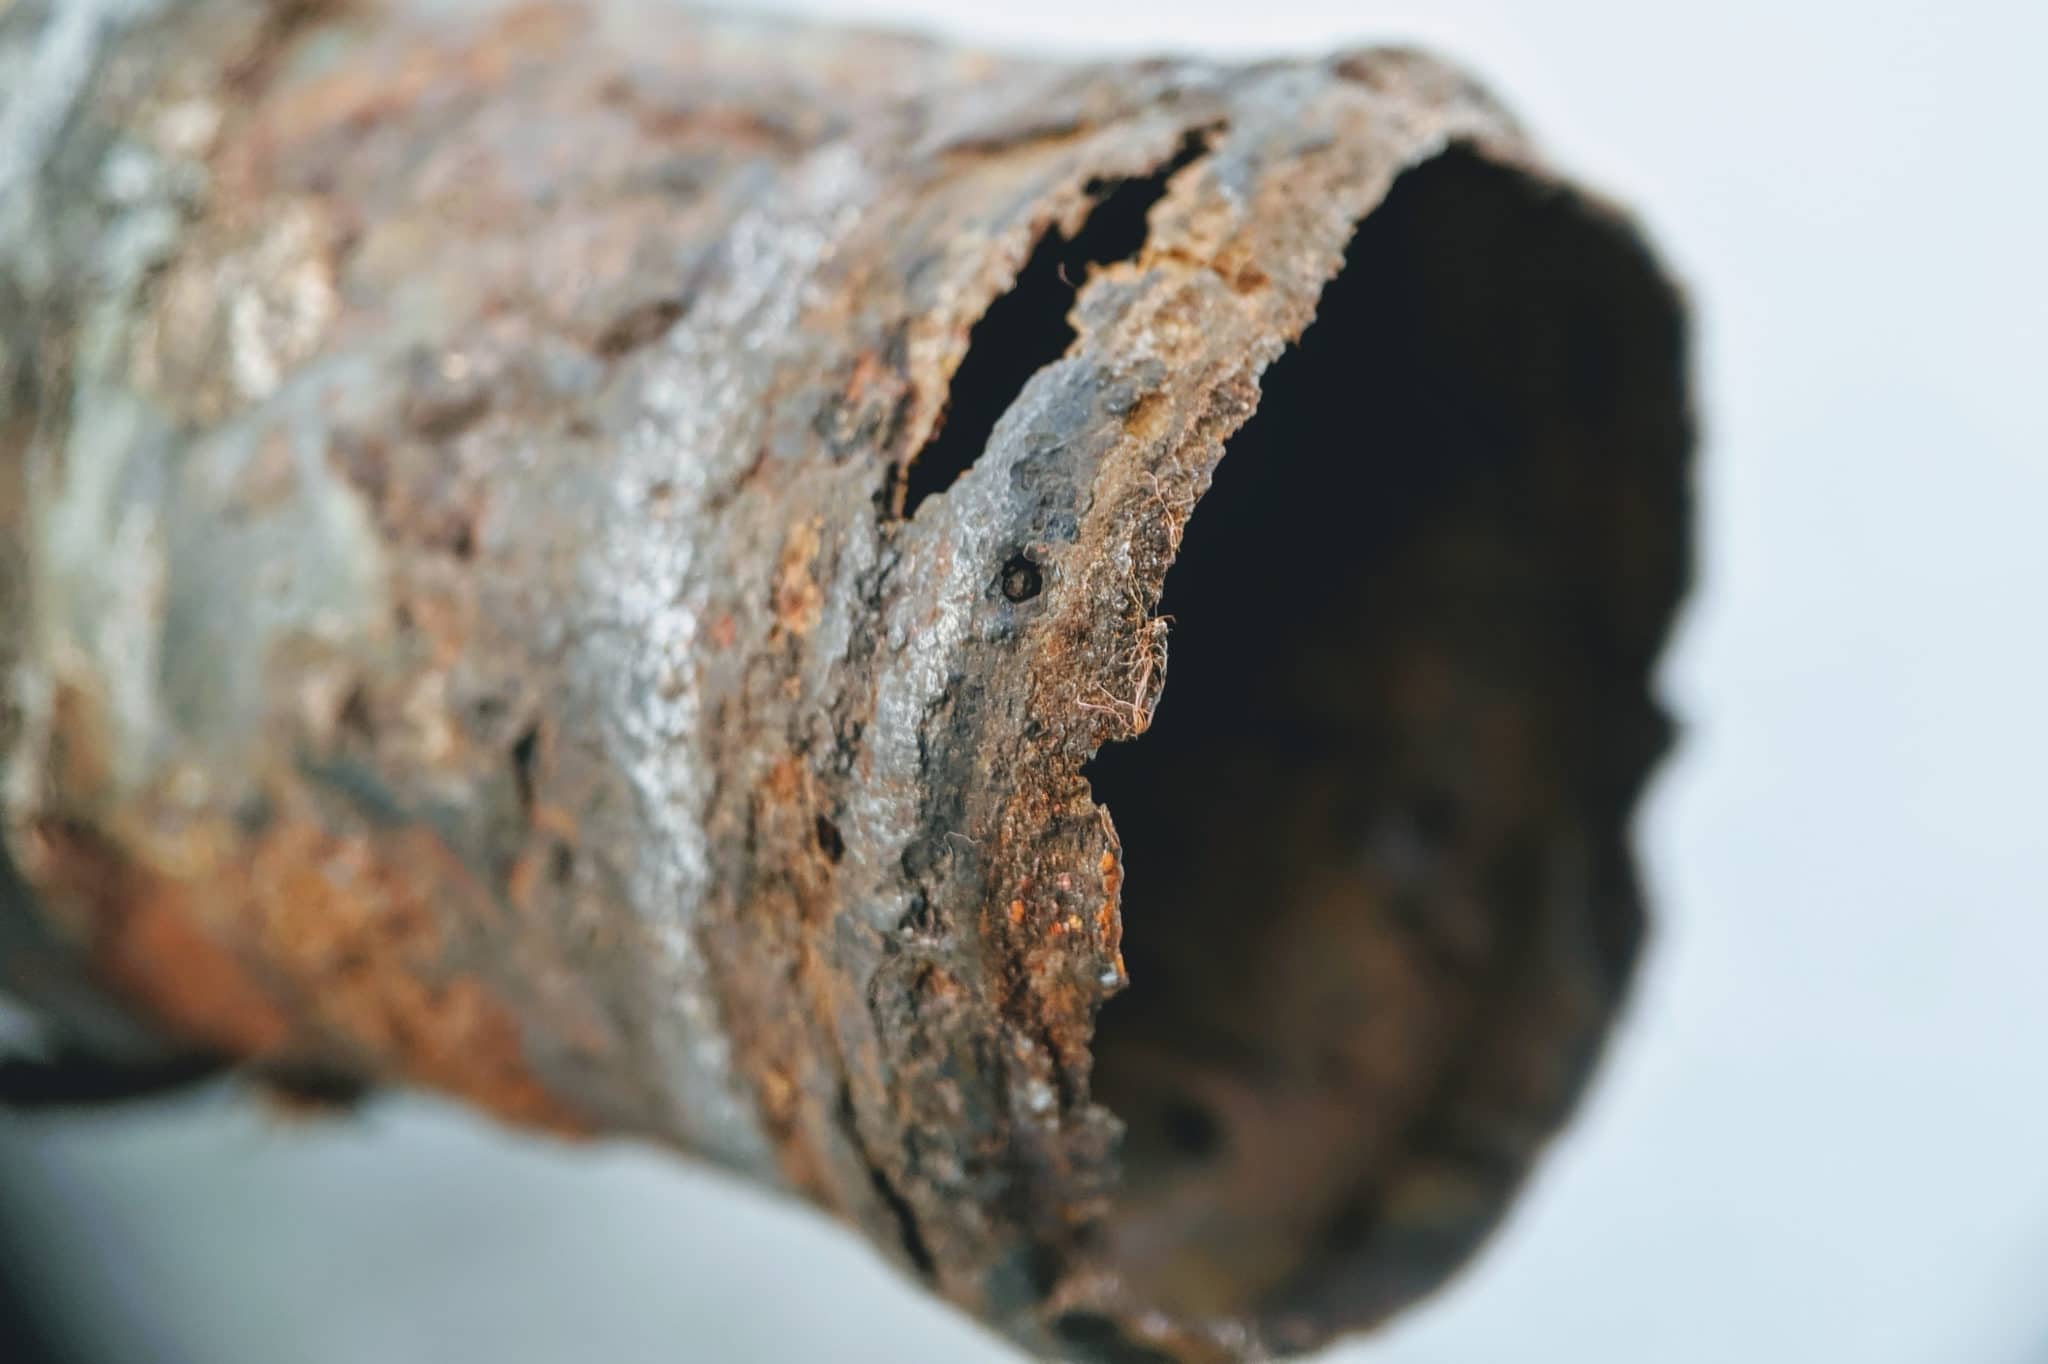 Rusted and cracked cast iron plumbing pipe